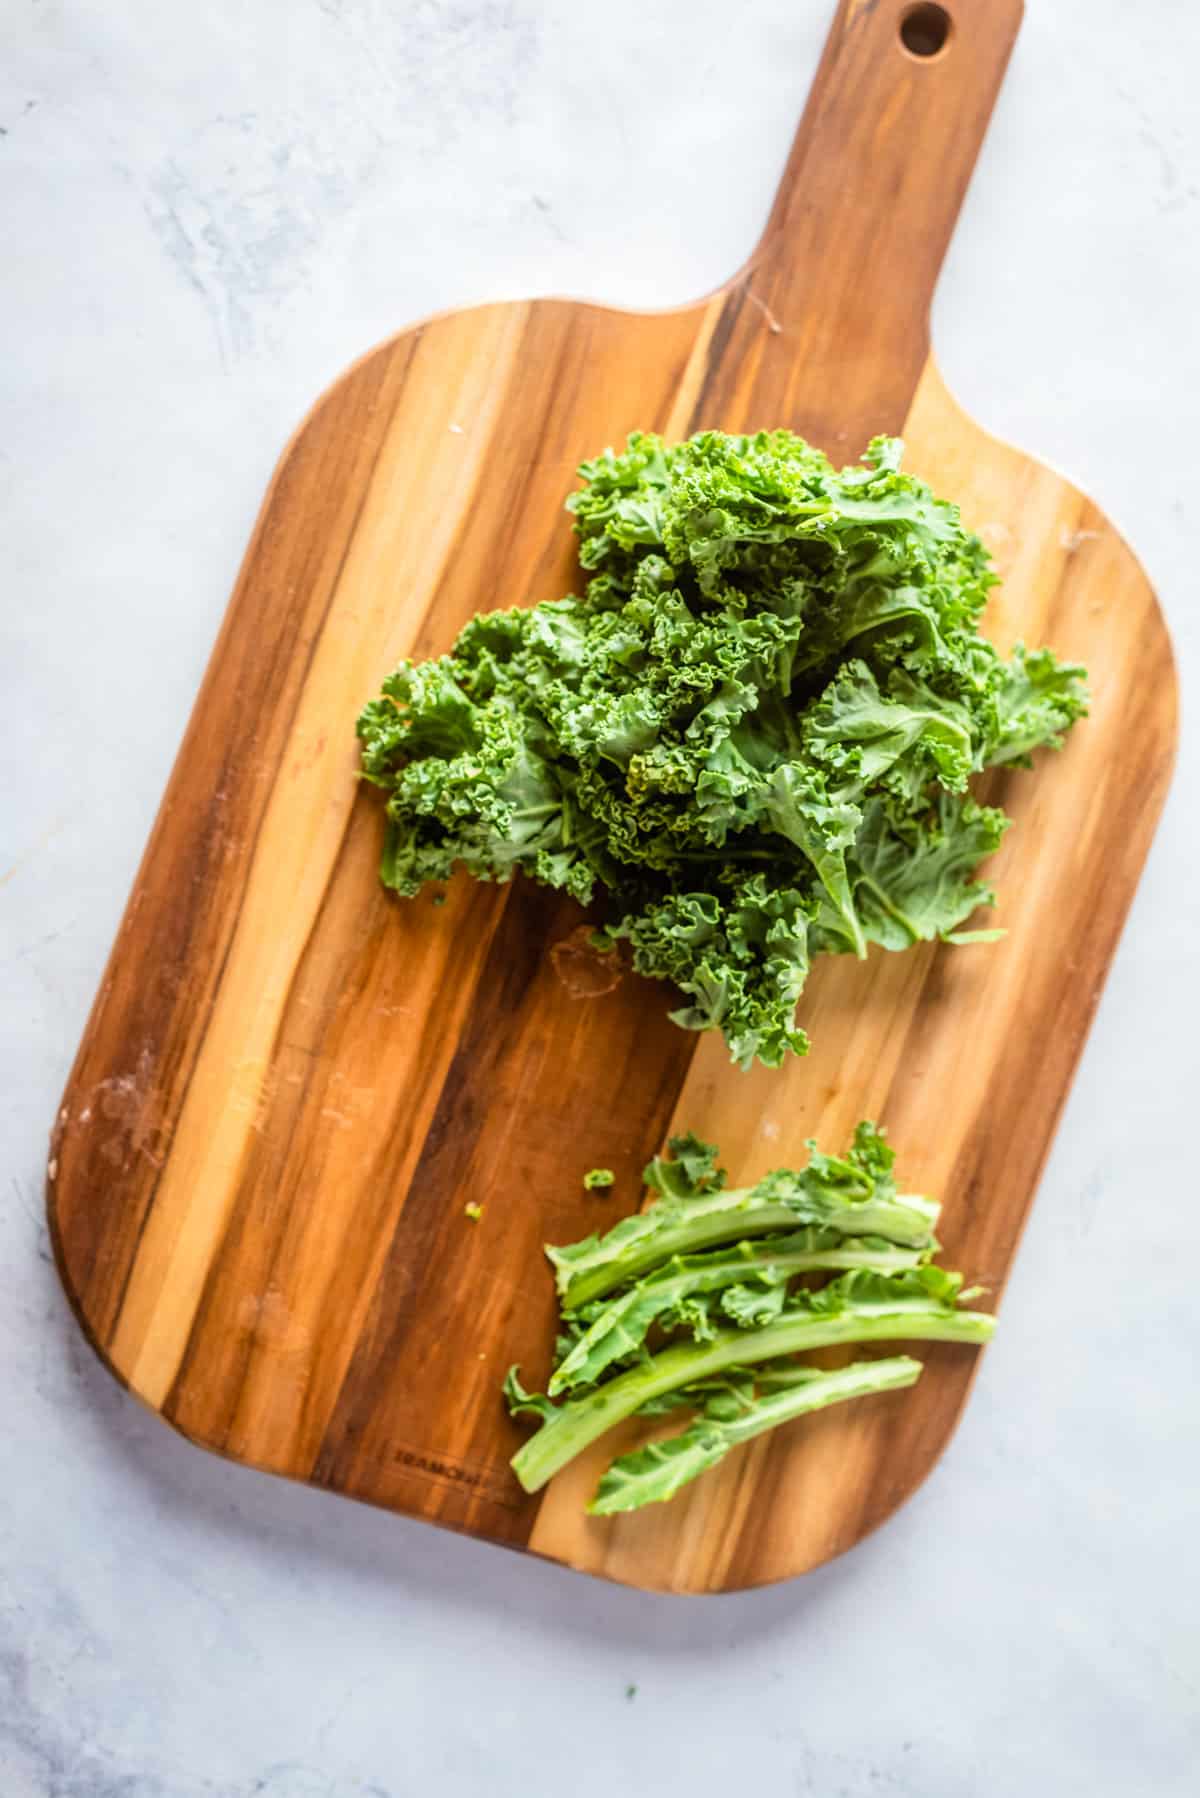 Overhead view of a wooden chopping board with chopped kale leaves and stem on top.